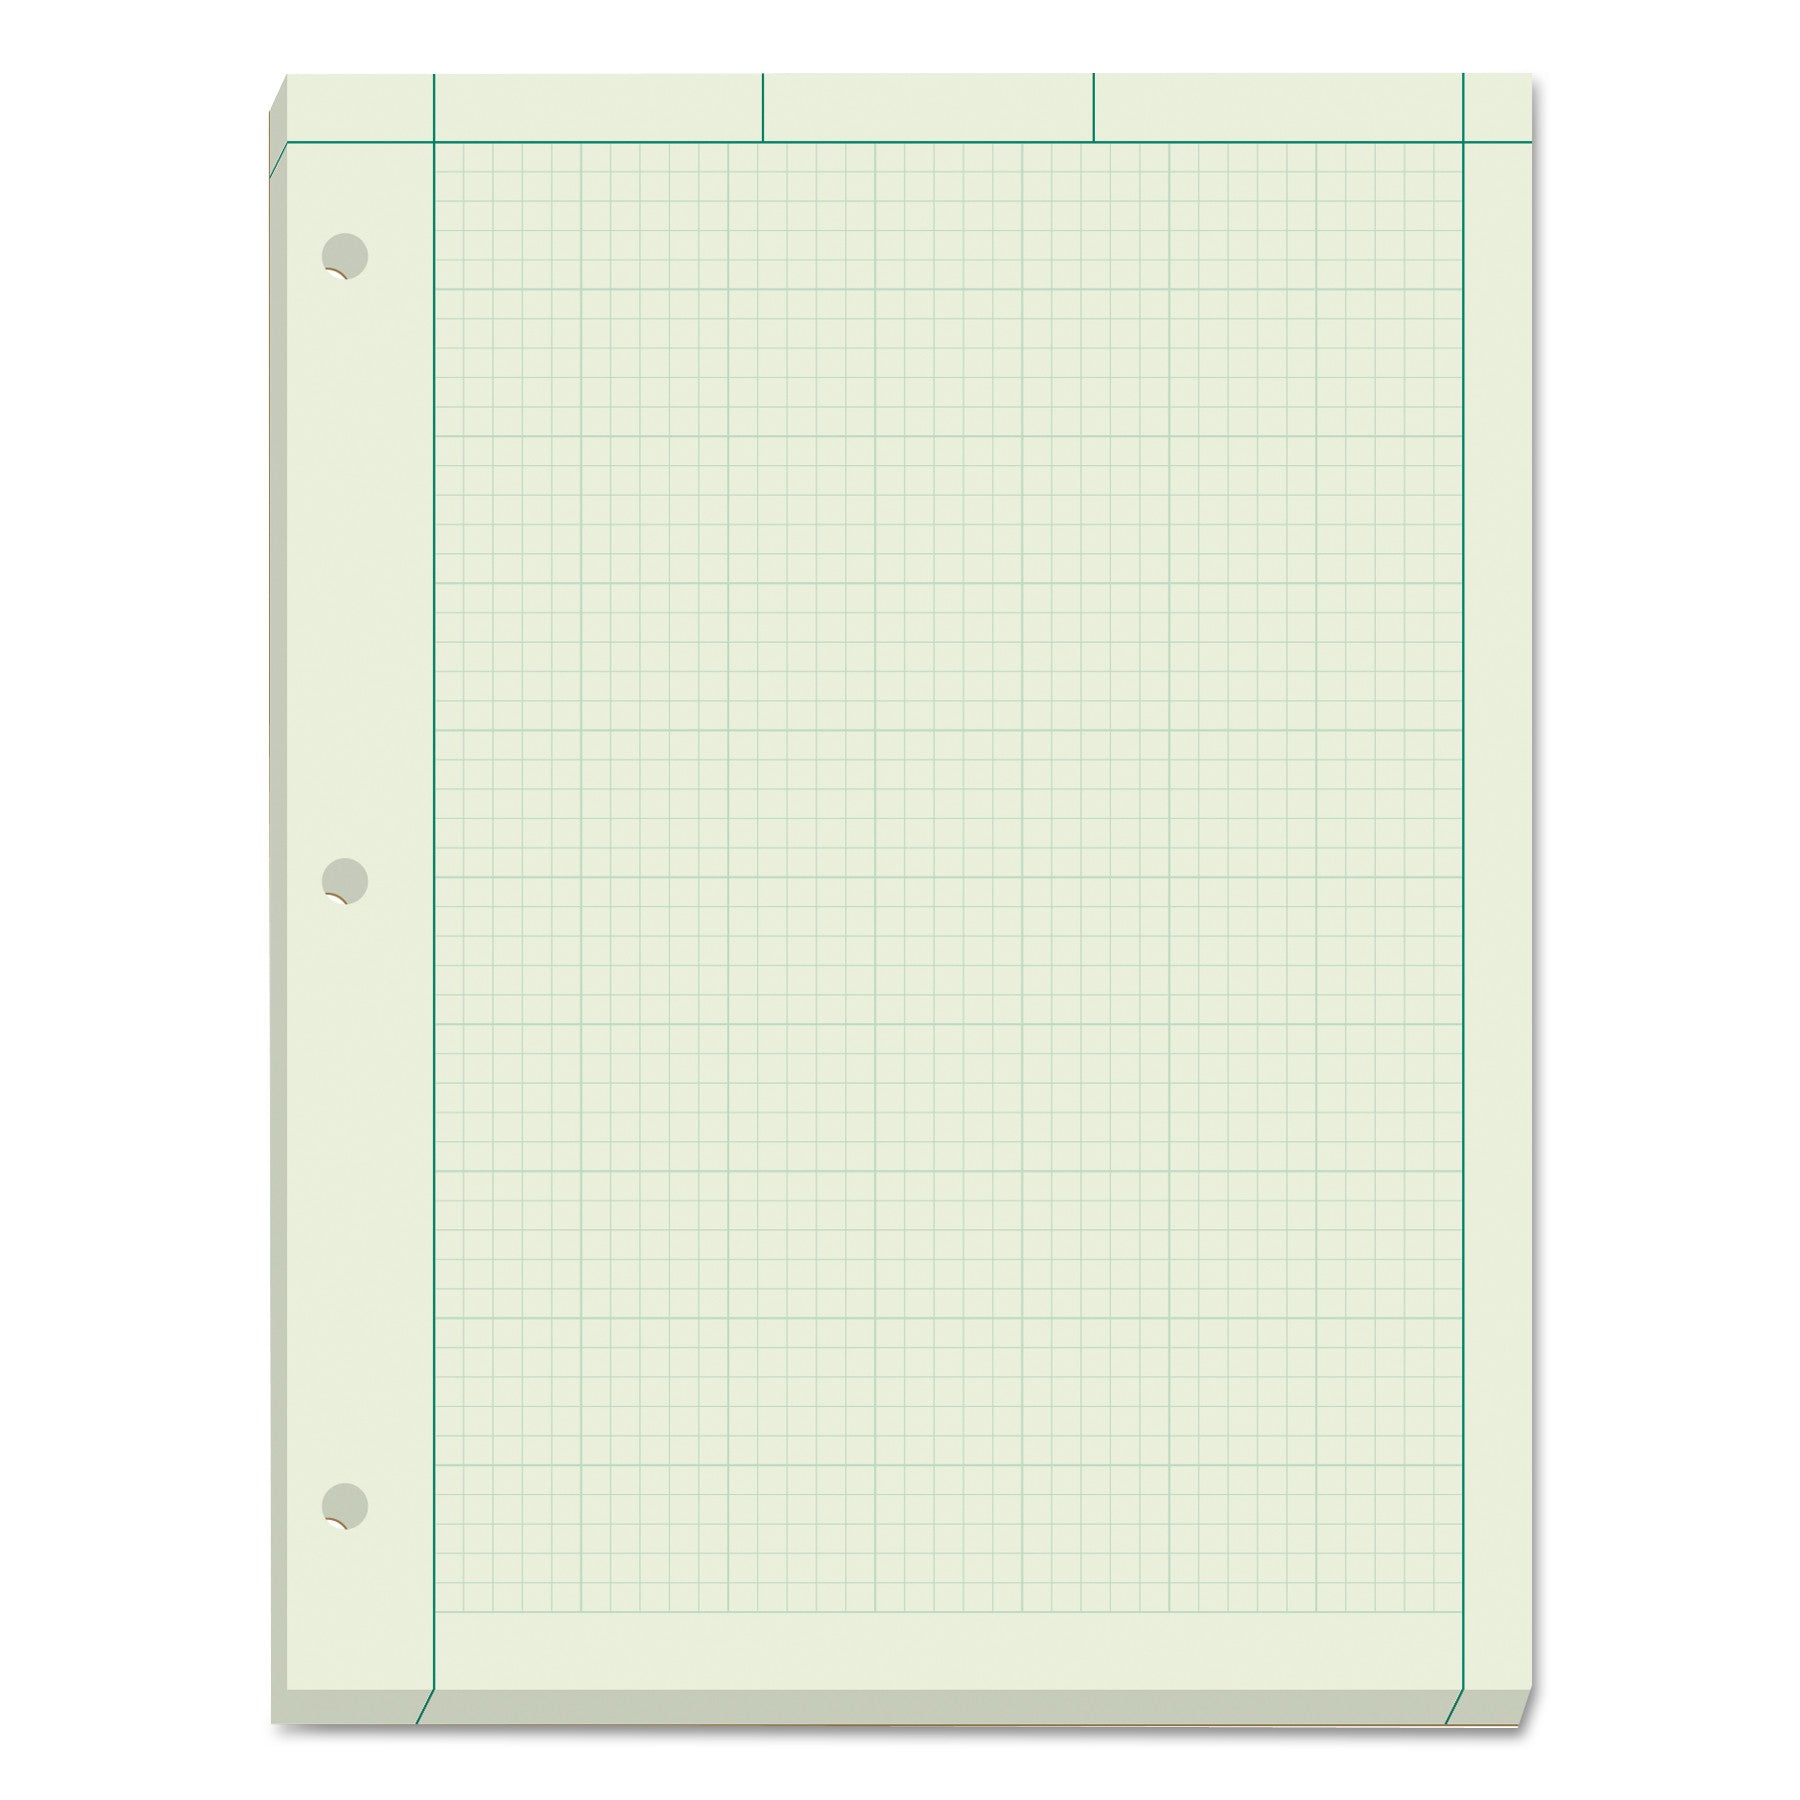 Engineering Computation Pads, Cross-Section Quadrille Rule (5 sq/in, 1 sq/in), Green Cover, 200 Green-Tint 8.5 x 11 Sheets - 